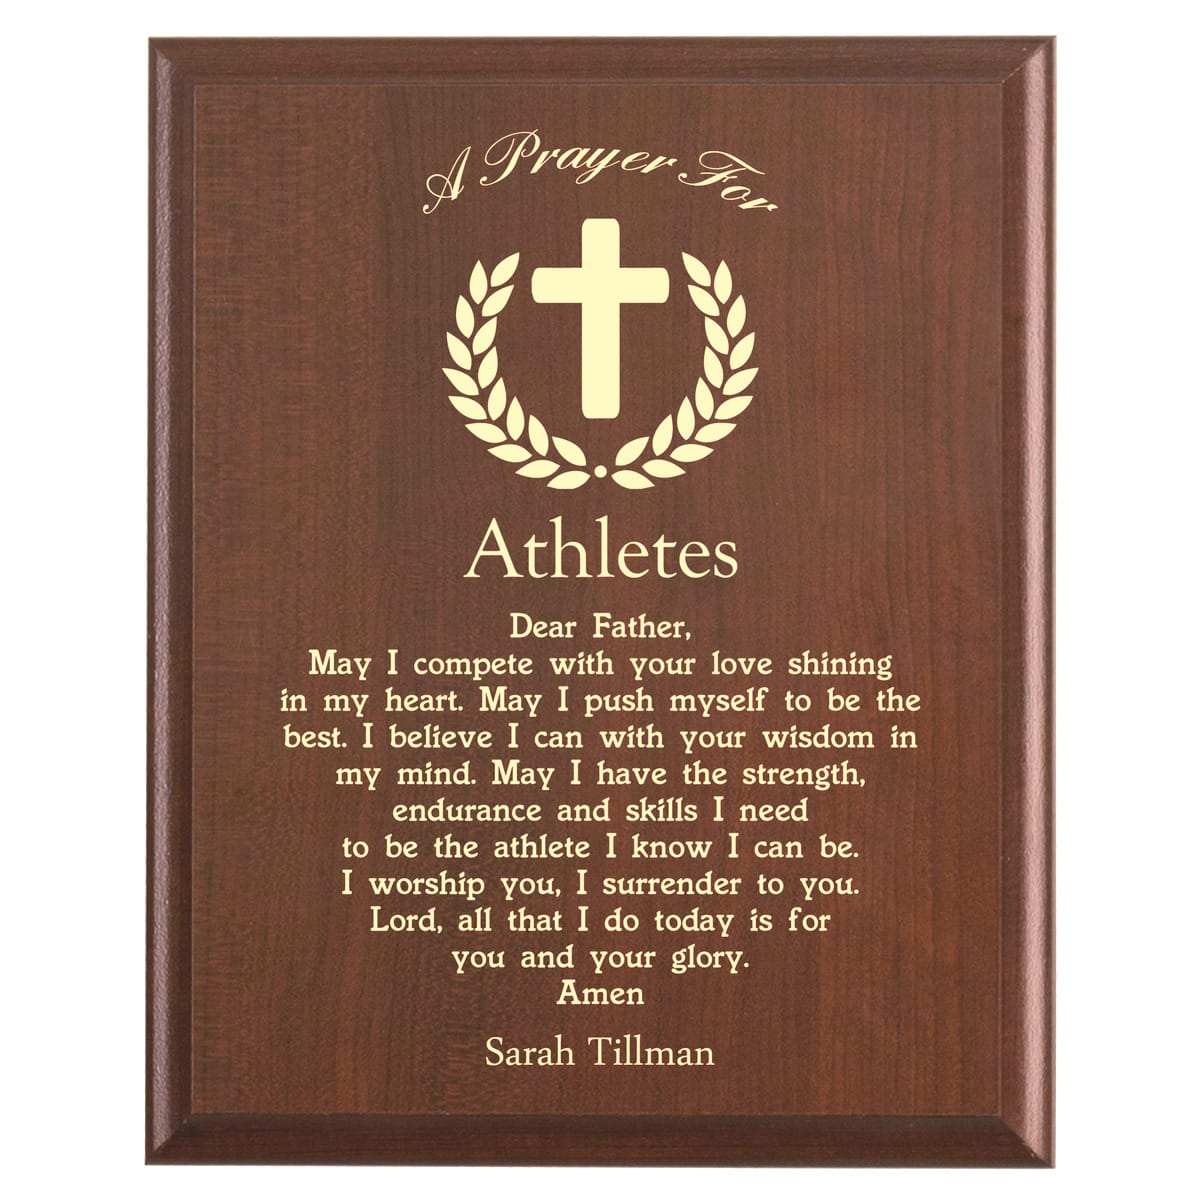 Plaque photo: Athletes Prayer Plaque design with free personalization. Wood style finish with customized text.